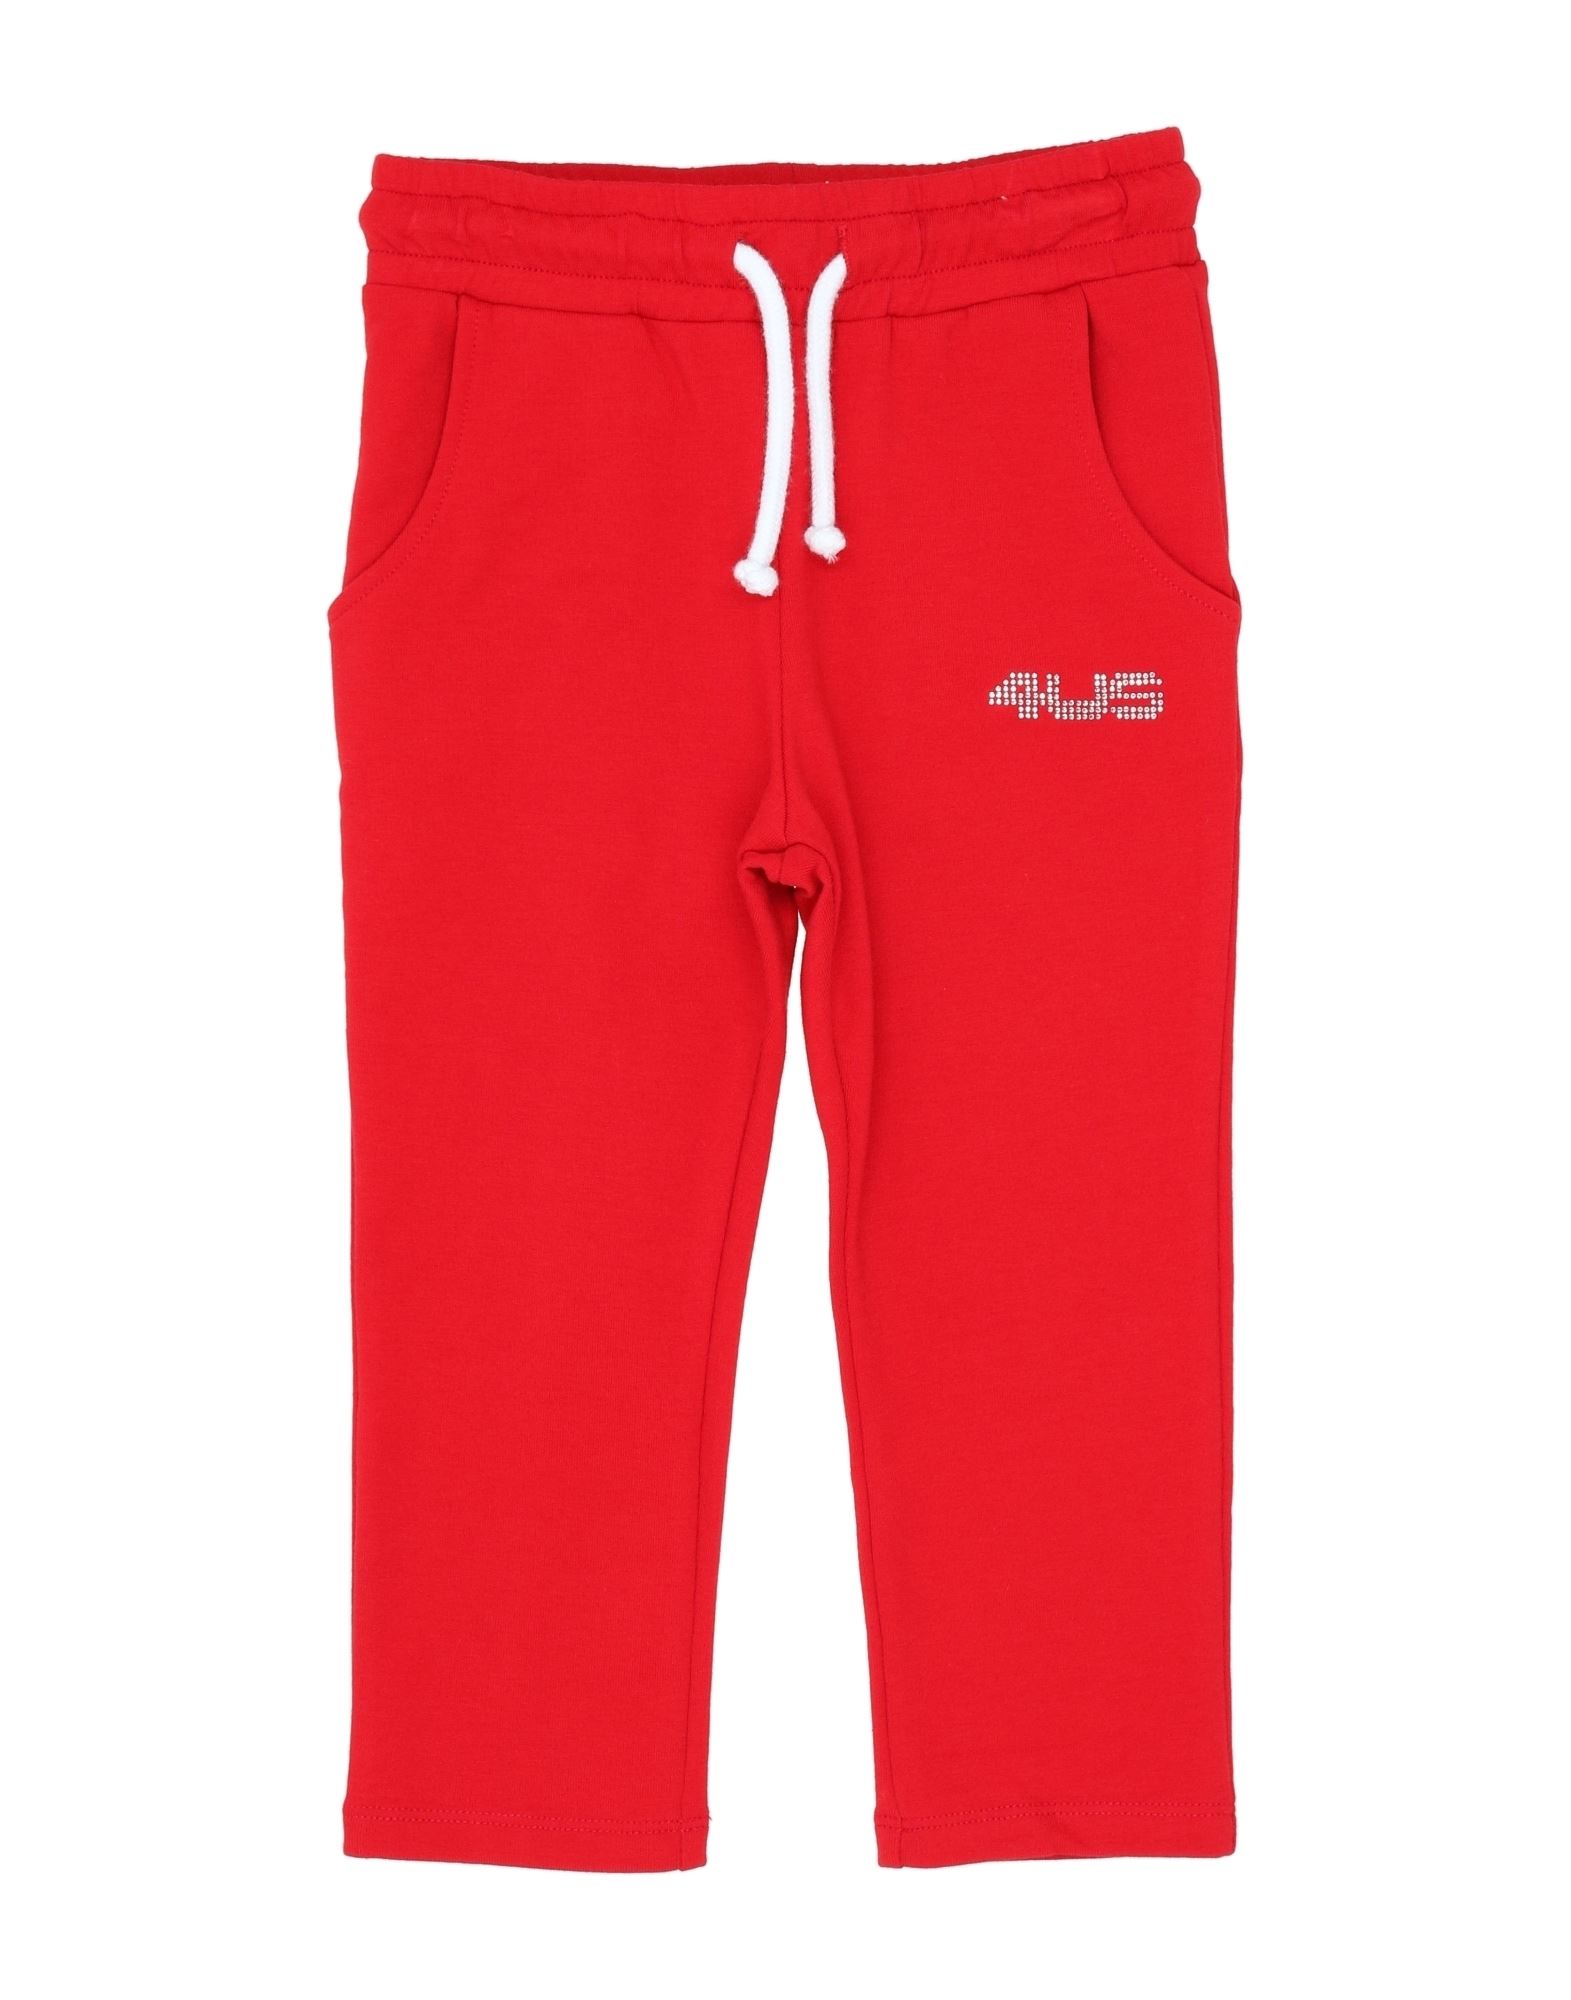 Cesare Paciotti 4us Kids' Pants In Red